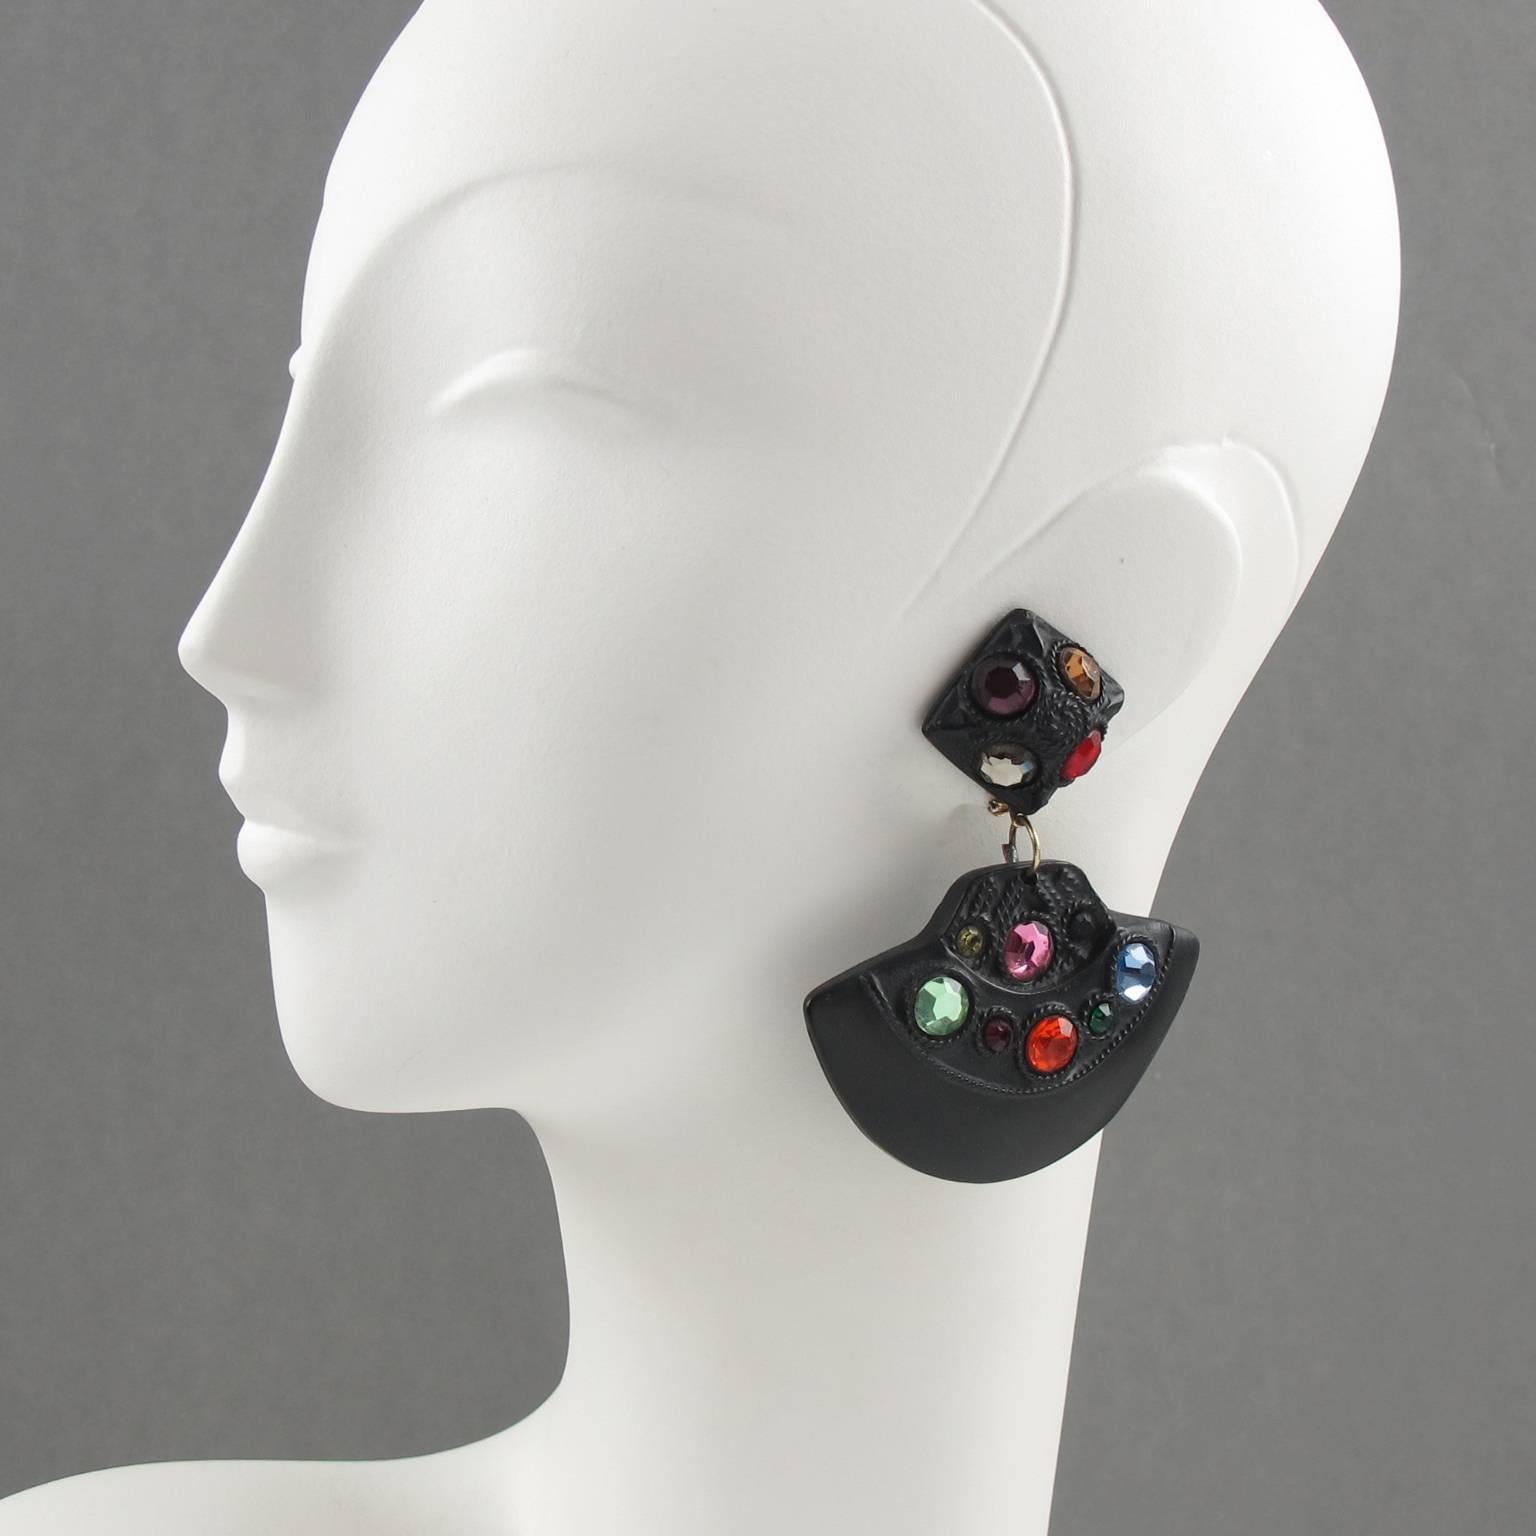 Elegant vintage KALINGER Paris large clip-on earrings. Oversized dangling shape featuring fan design. Black carved resin  with textured pattern topped with multicolor faceted rhinestones. This piece is typical of this French designer 80’s style.